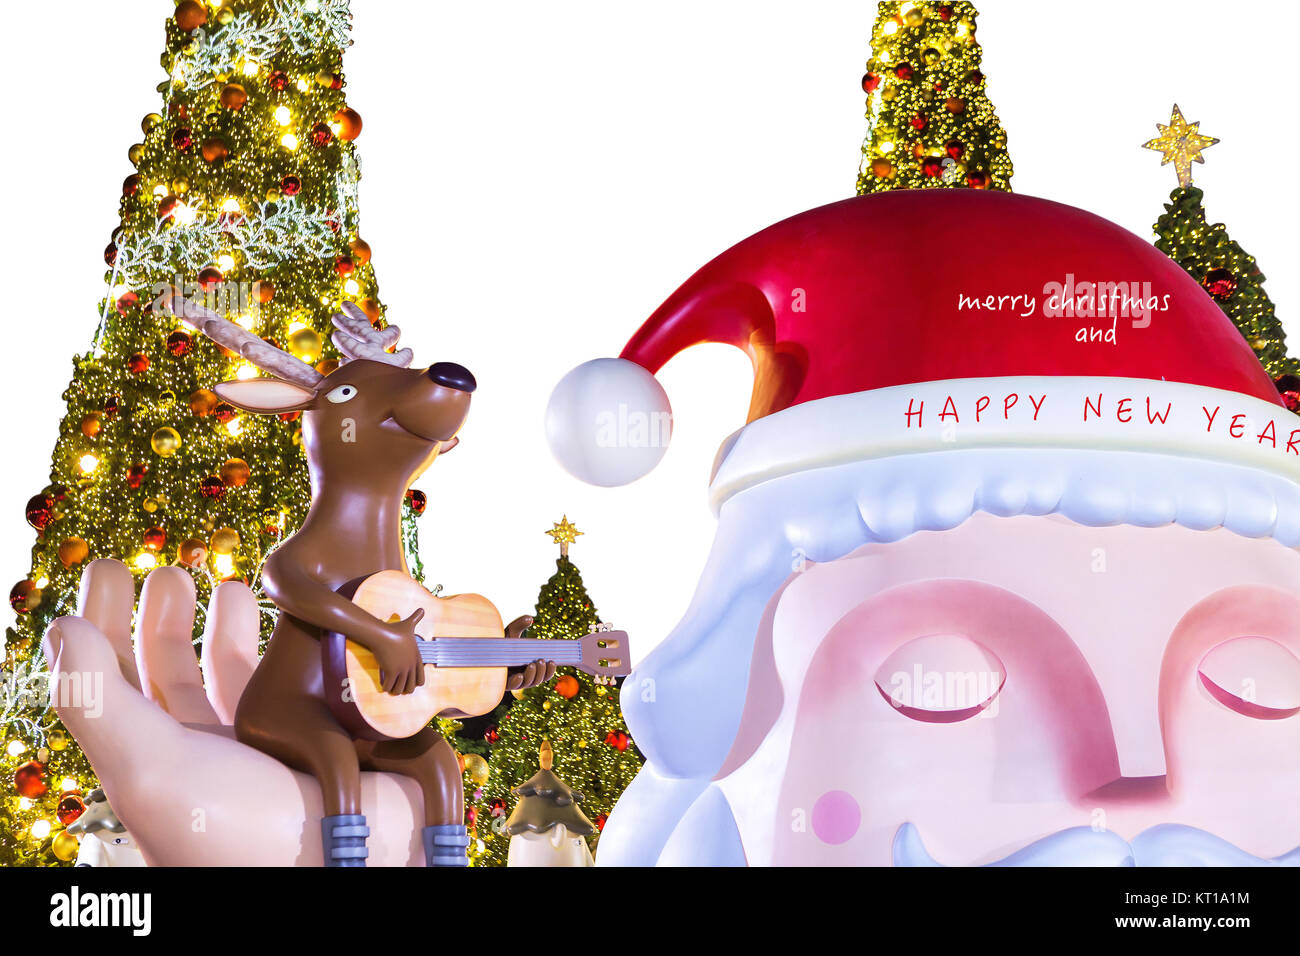 merry christmas and happy new year with santa claus and reindeer and lighting christmas tree Stock Photo